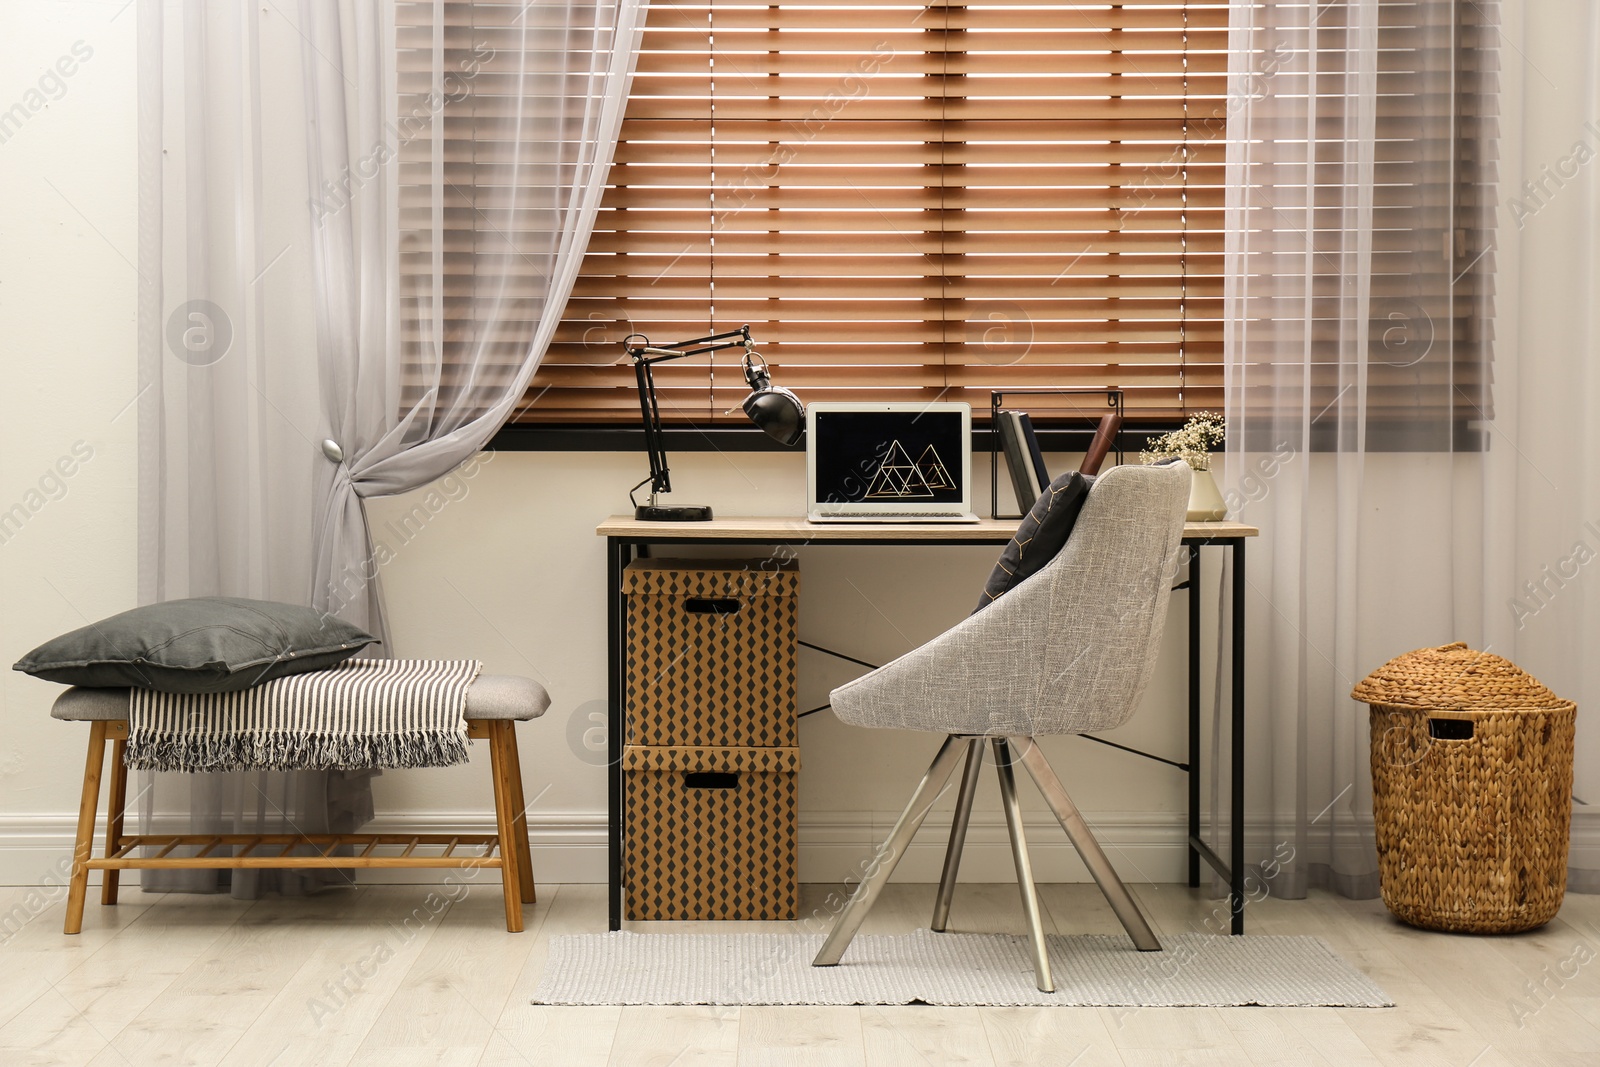 Photo of Comfortable workplace near window with horizontal wooden blinds